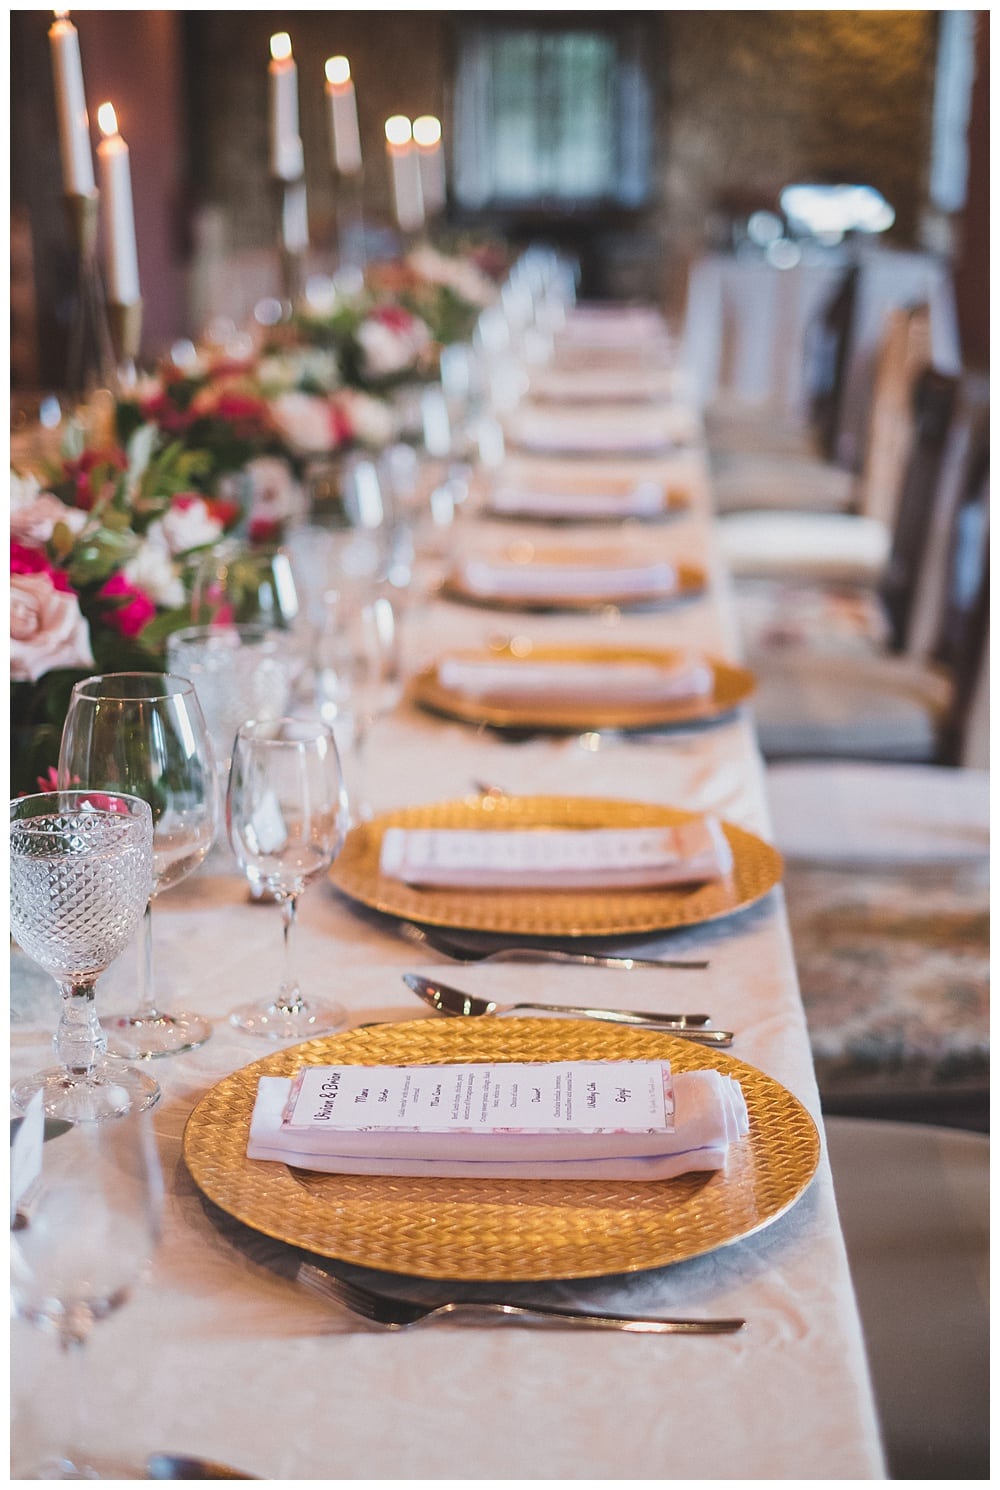 wedding table decoration with natural pink and red roses rooms Quinta Vintage for rustic wedding #rusticwedding #weddingtable #weddingflowers #weddingroses #weddingredroses #weddingdecoration #bohowedding #intimatewedding #sintrawedding #rainywedding #quintamyvintagewedding